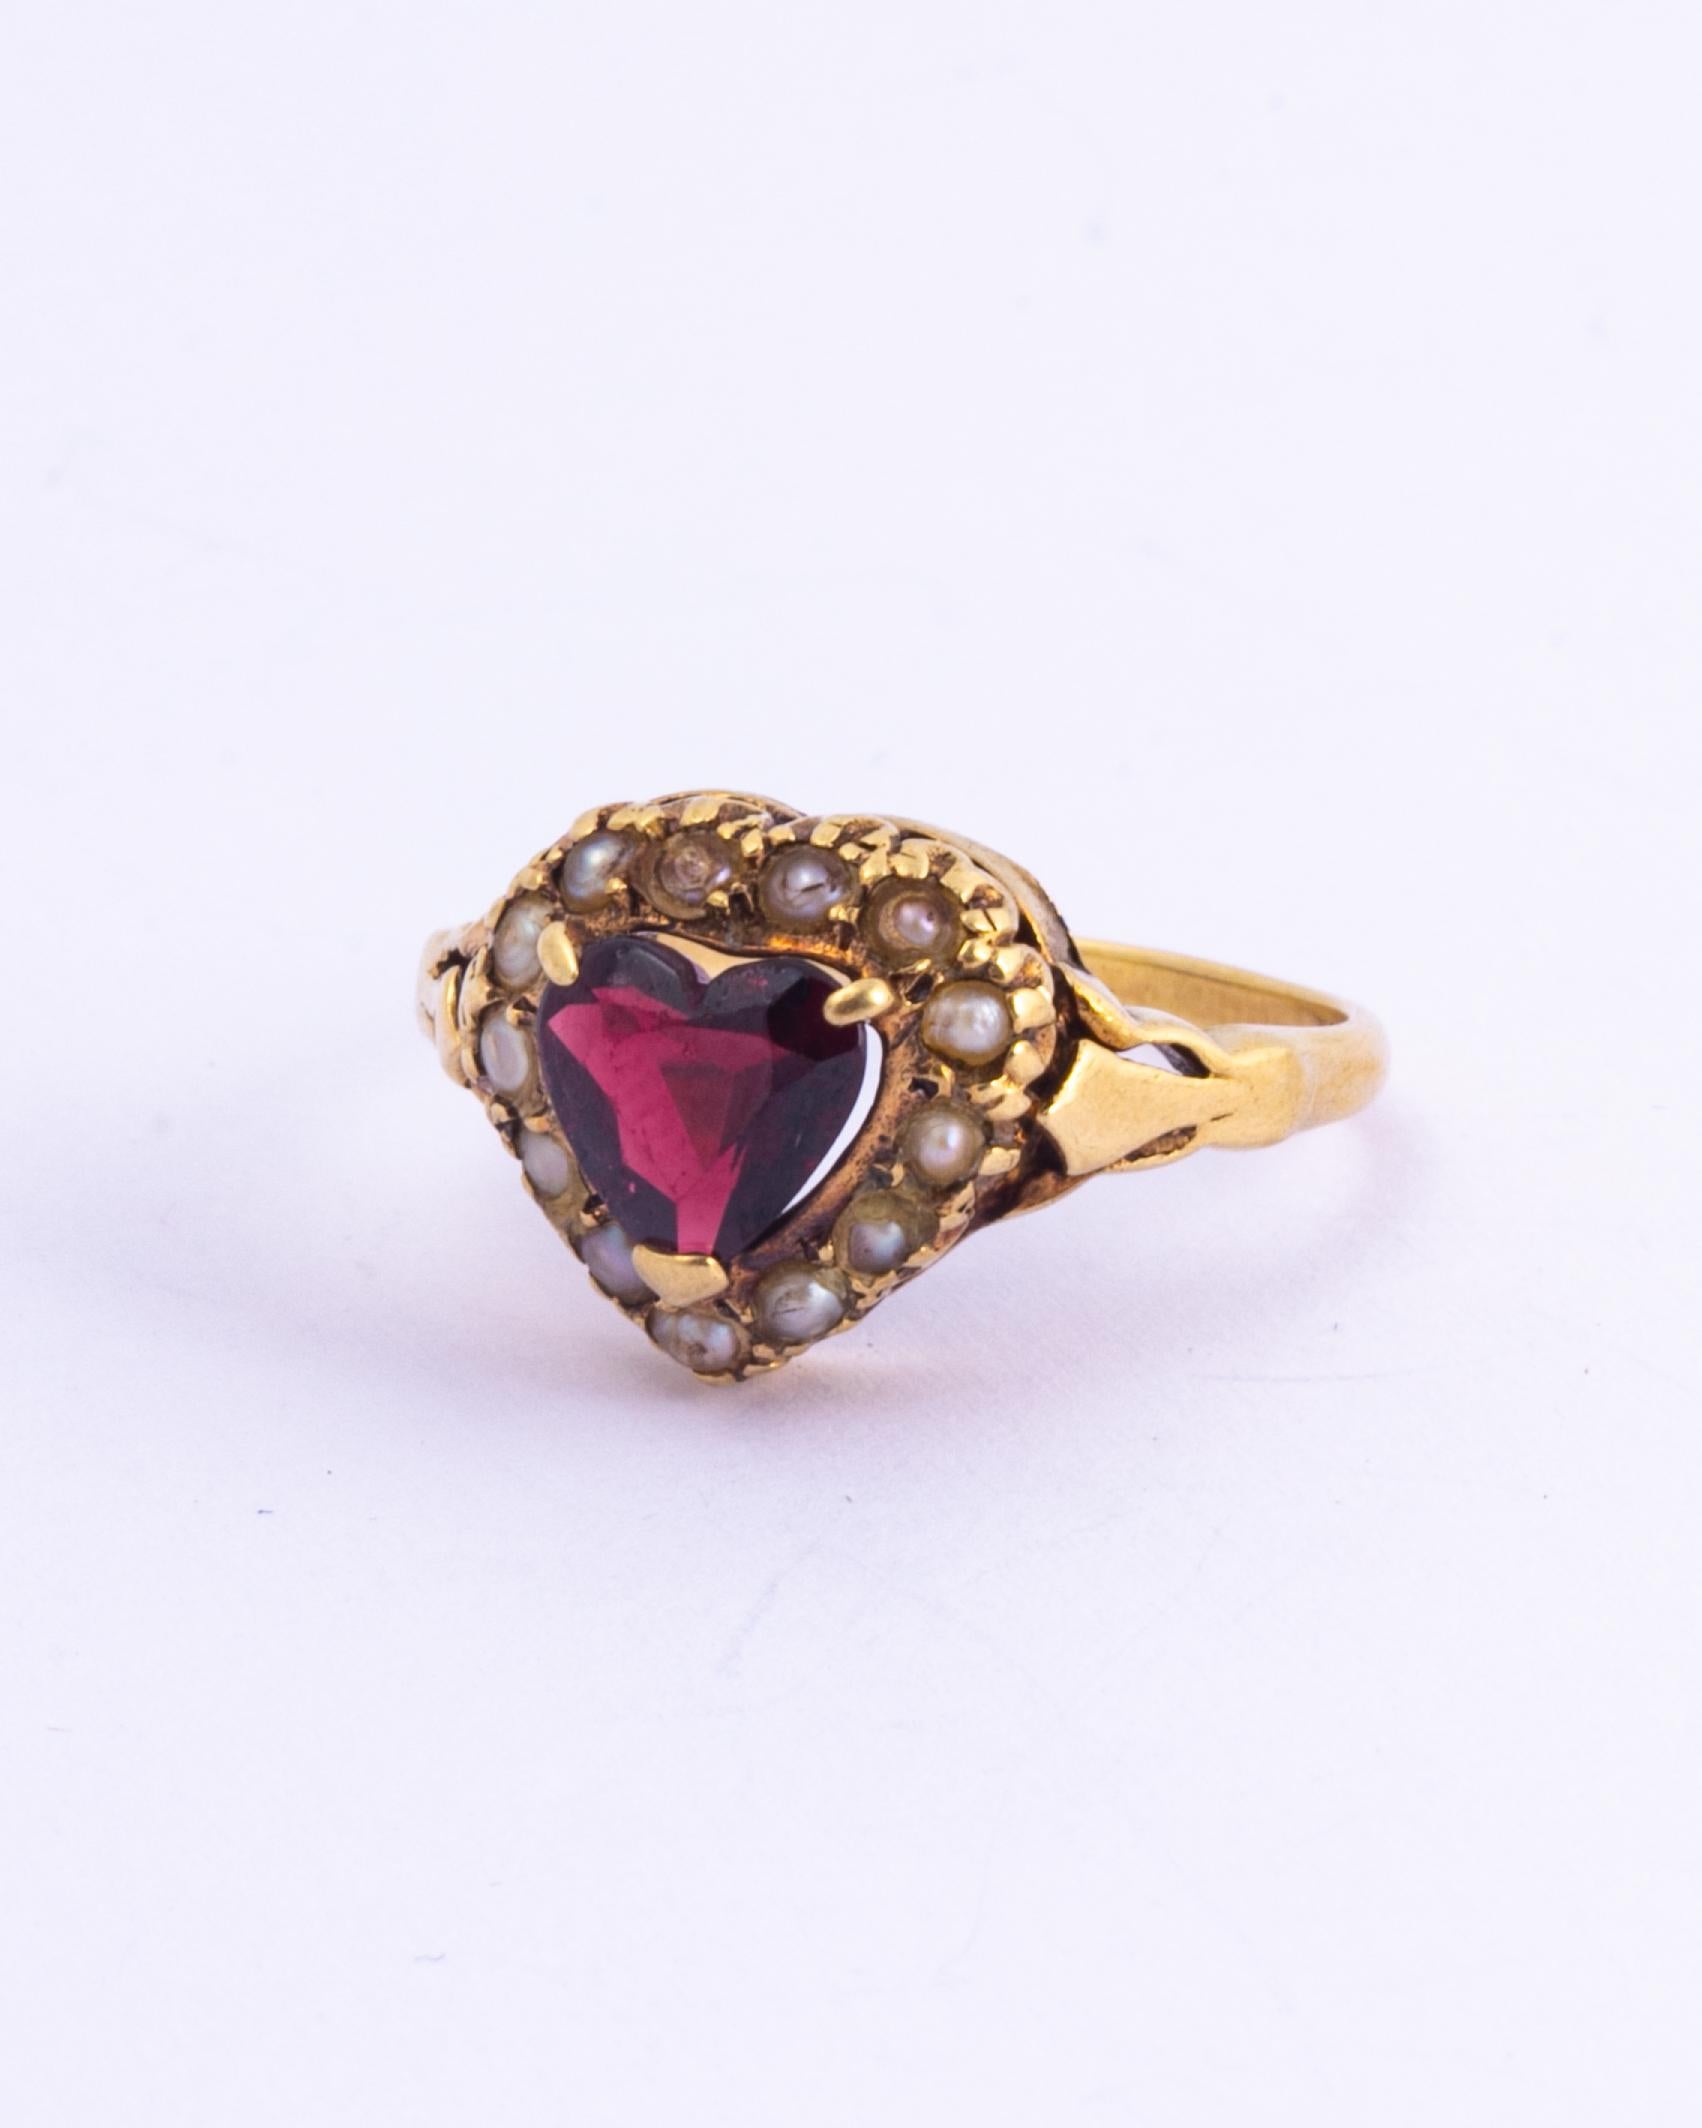 This stunning ring holds the most gorgeous red garnet in the shape of a heart. Surrounding this lovely stone is a halo of sweet pearls. The gallery is decorative and this ring also has moulded shoulders. 

Ring Size: N 1/2 or 7
Heart Dimensions: